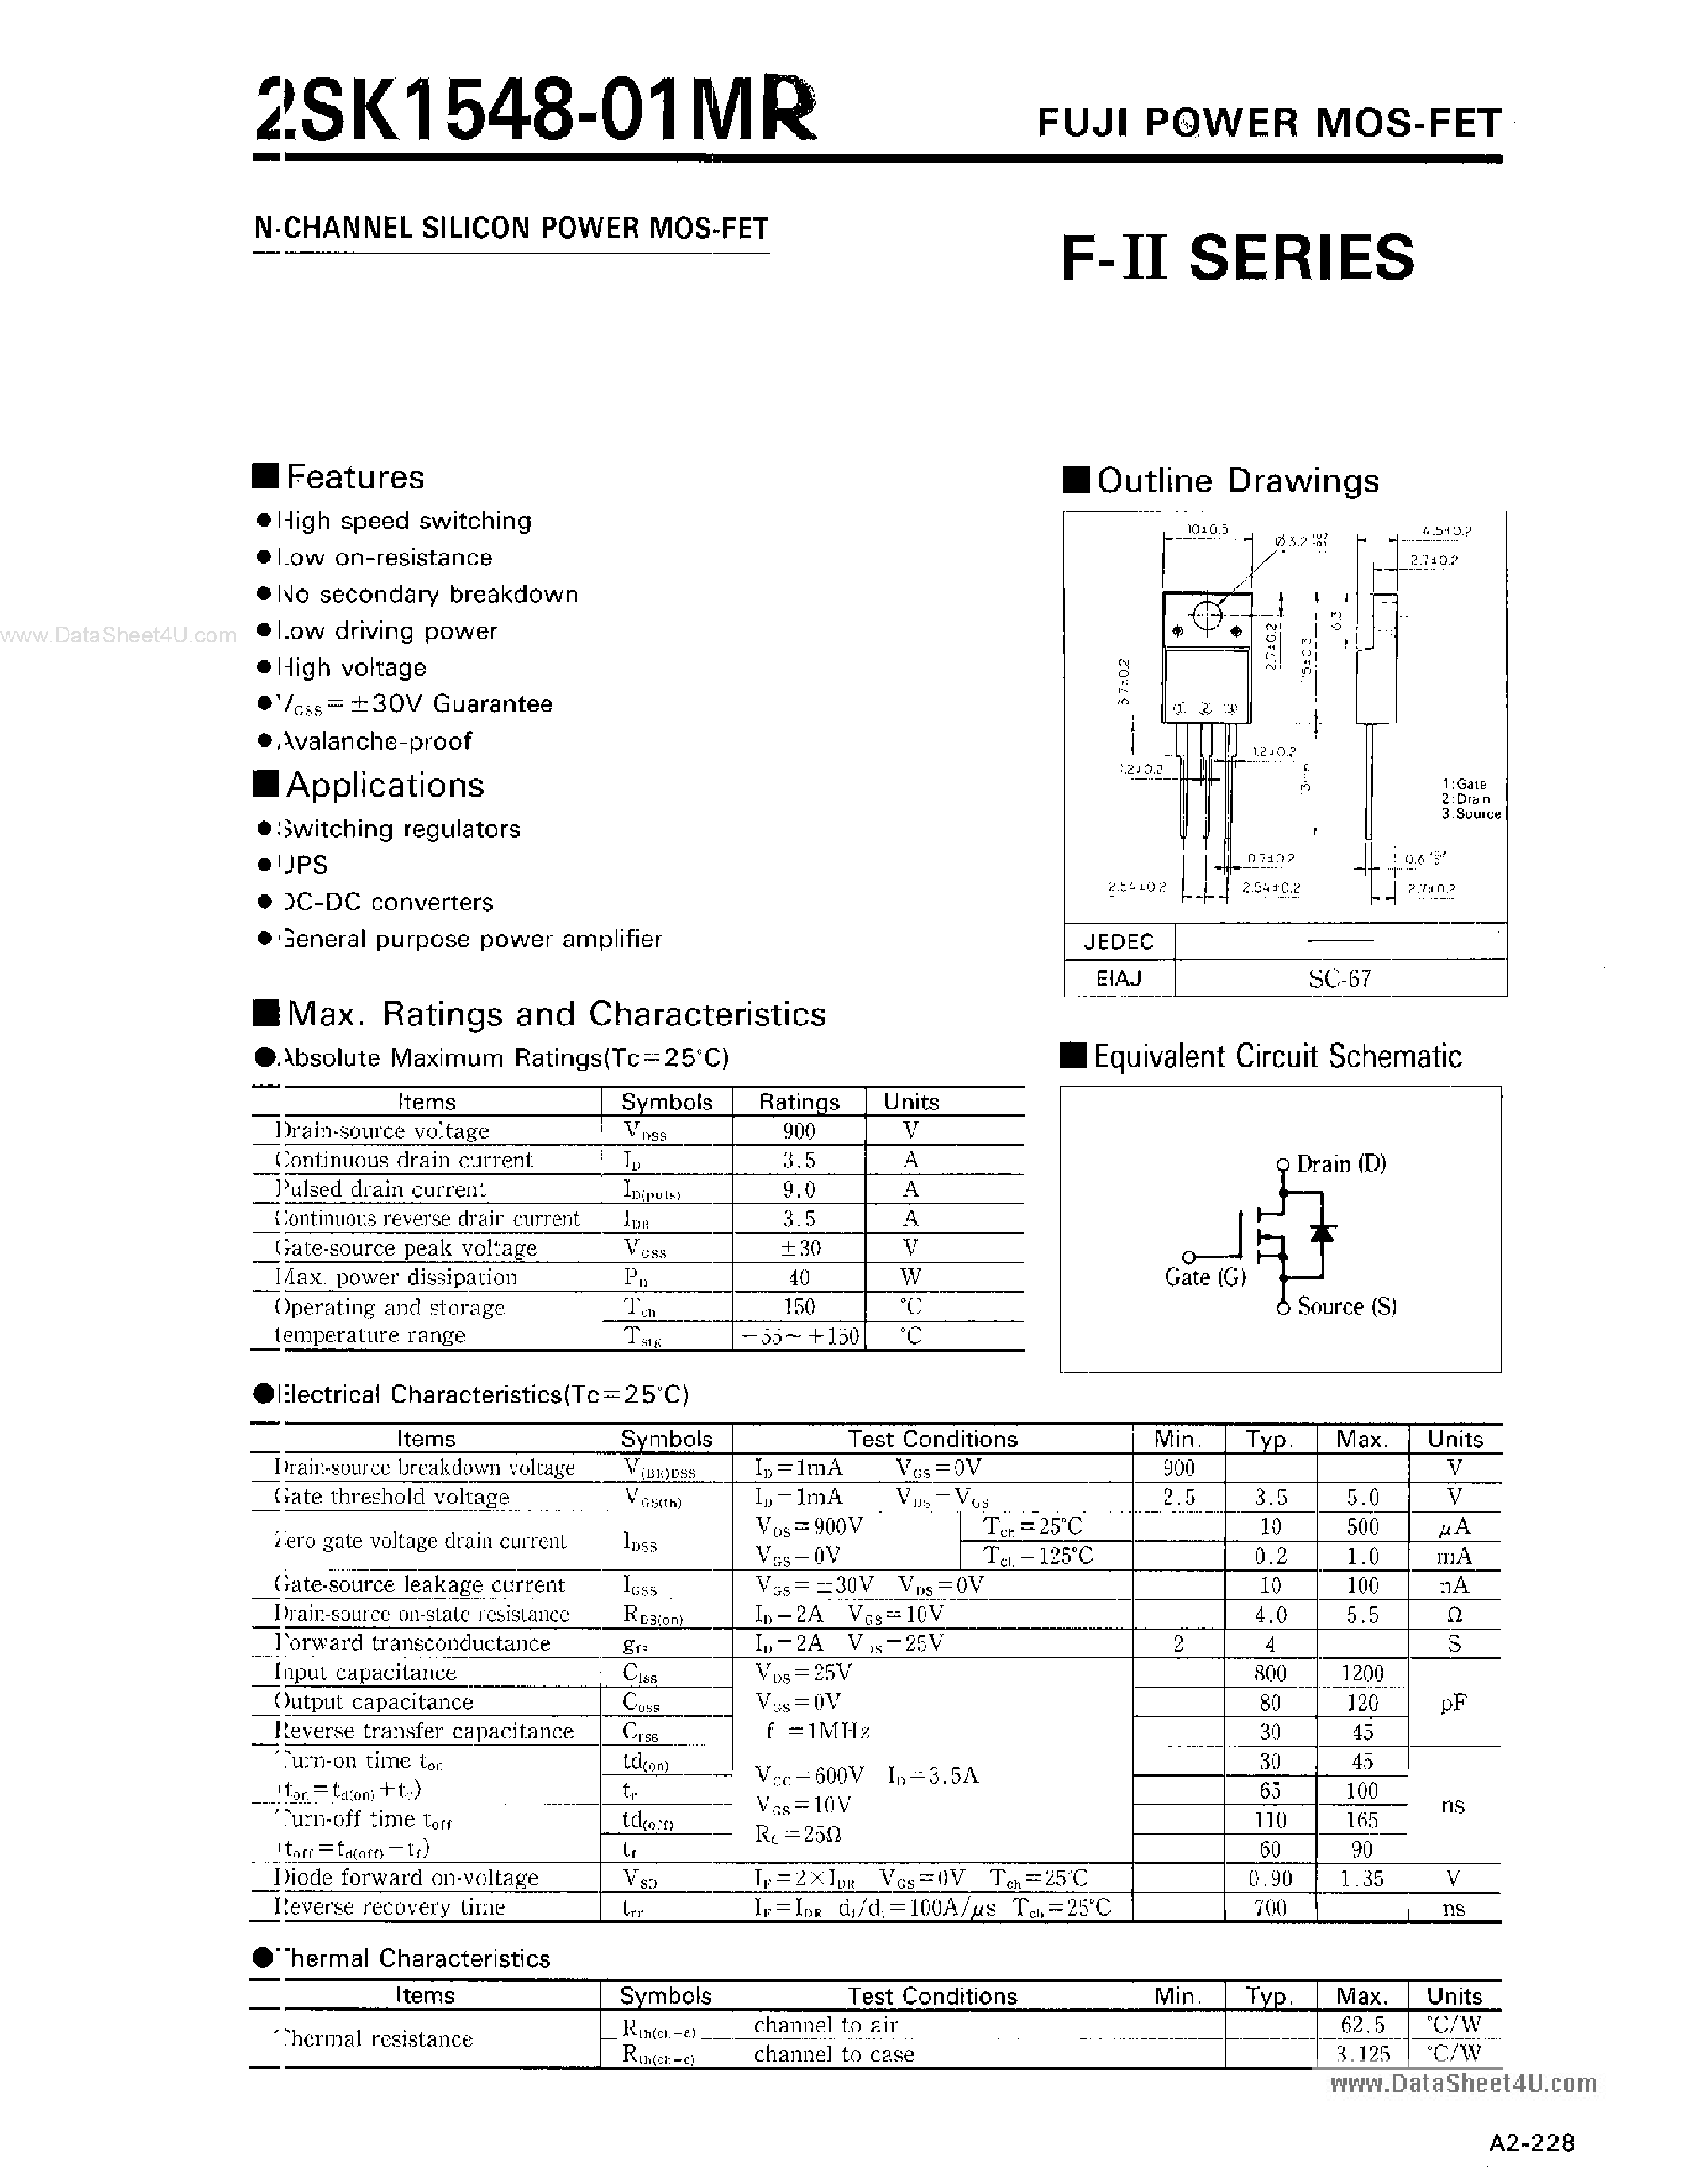 Datasheet K1548 - Search -----> 2SK1548-01MR page 1